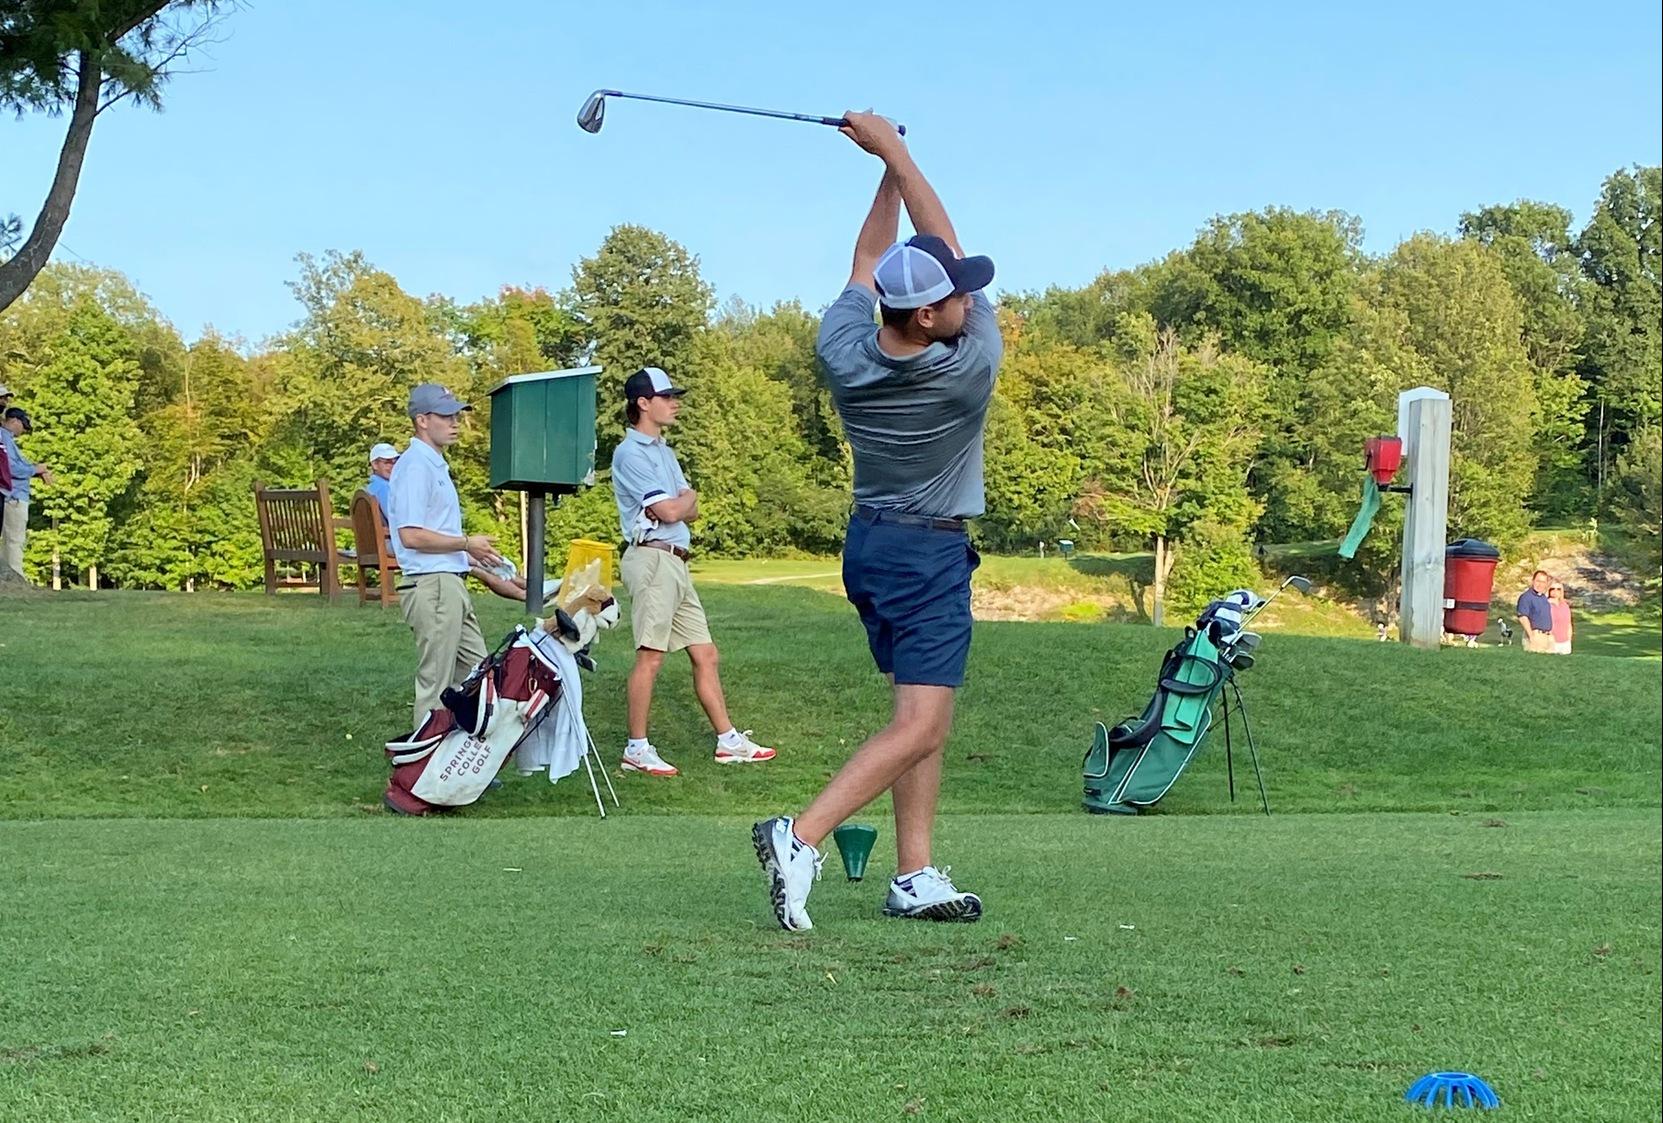 Cannata, Salem State Lead the Field After First Round of the 2021 MASCAC Golf Championship